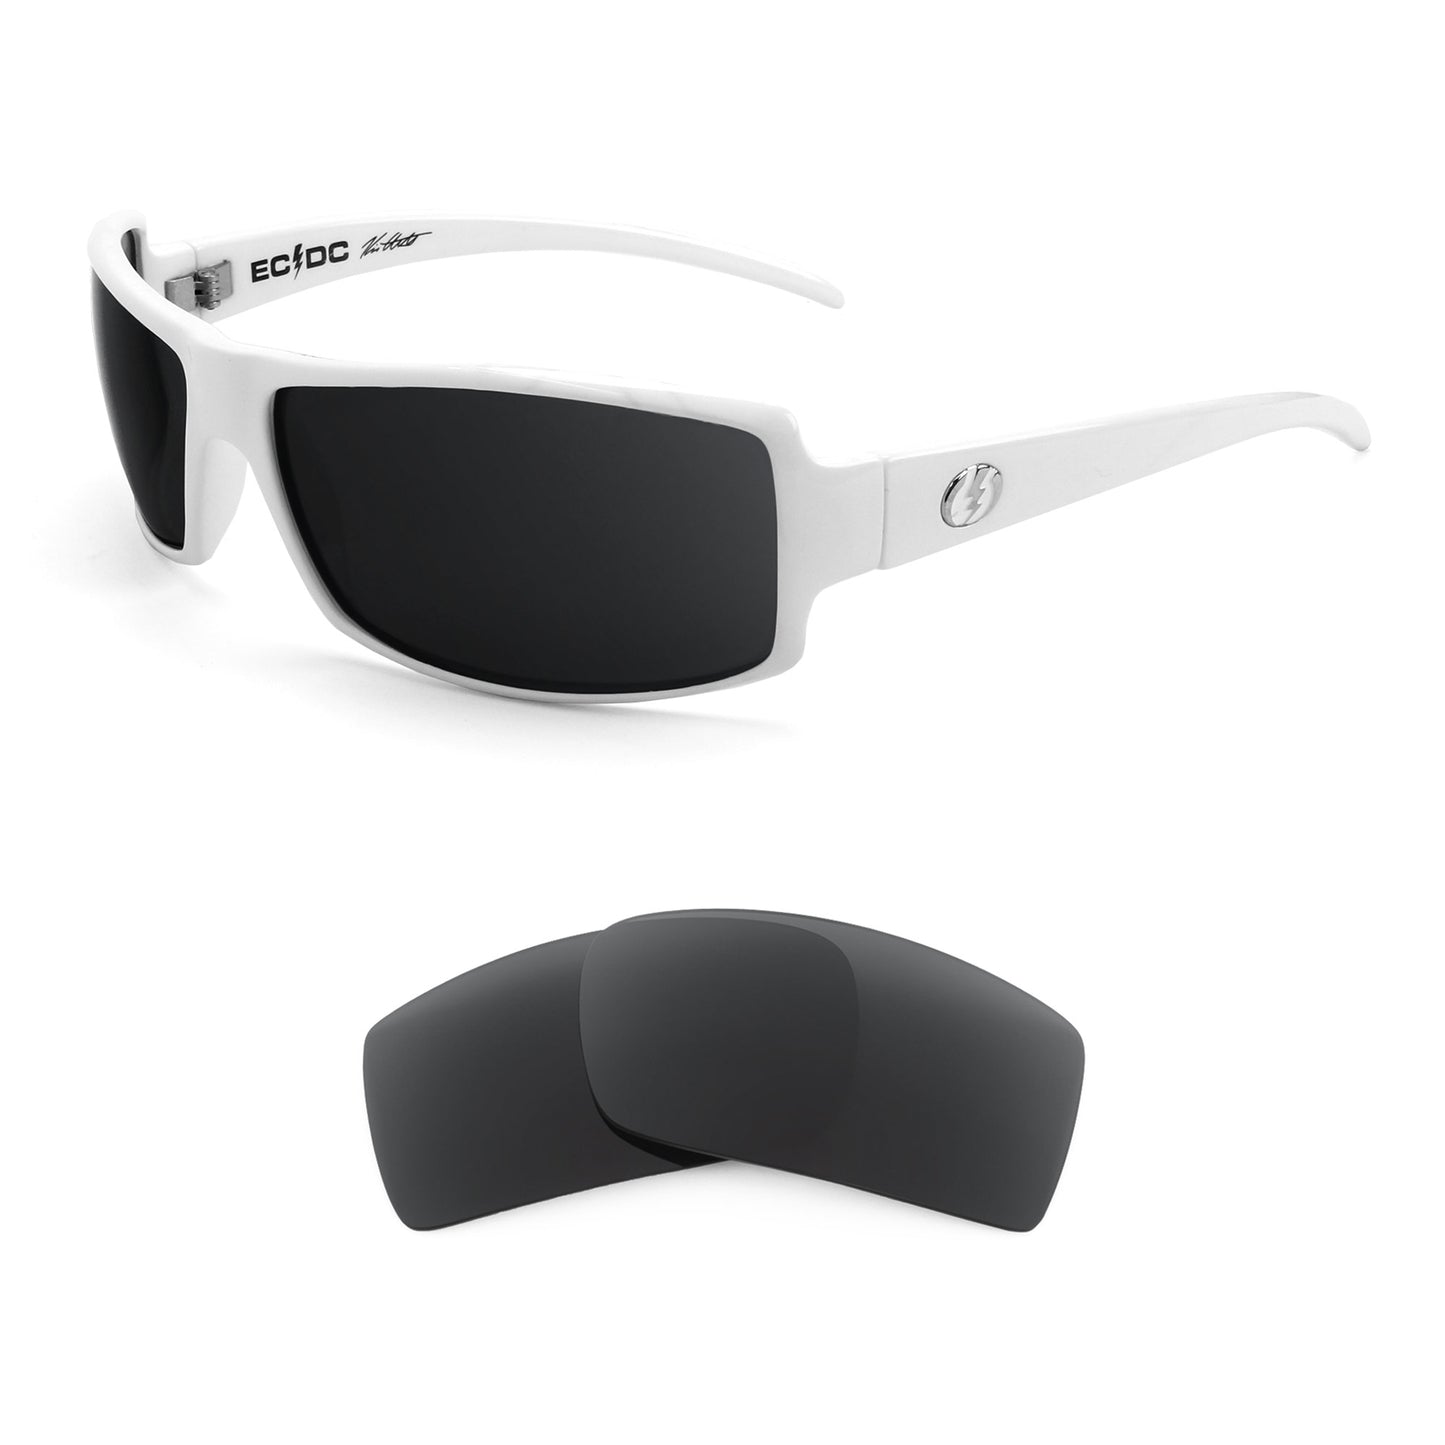 Electric EC-DC sunglasses with replacement lenses